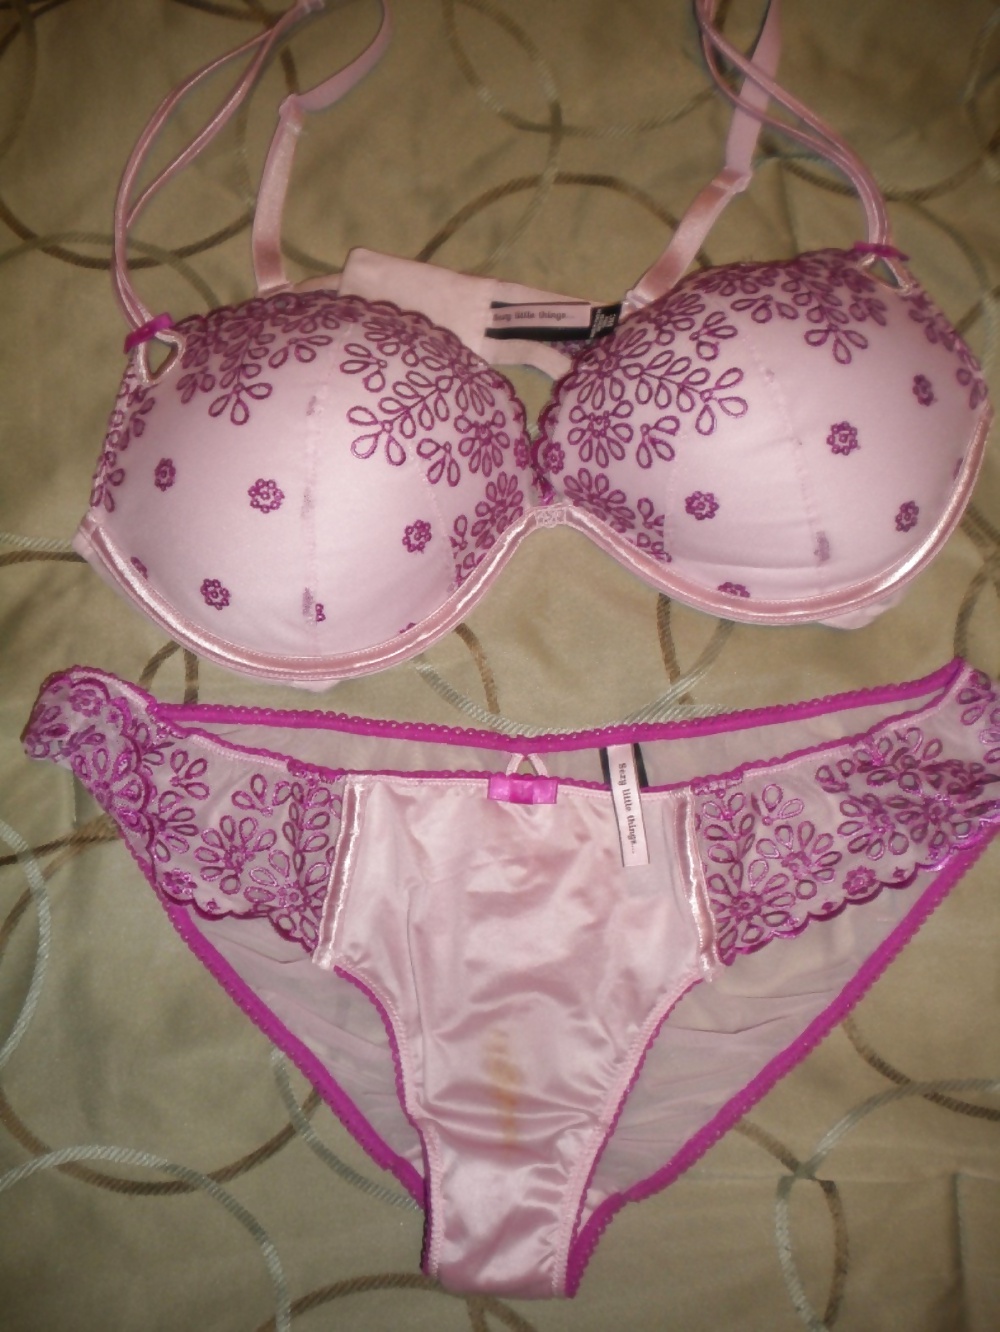 Bra And Panties Dirty Pictures Images